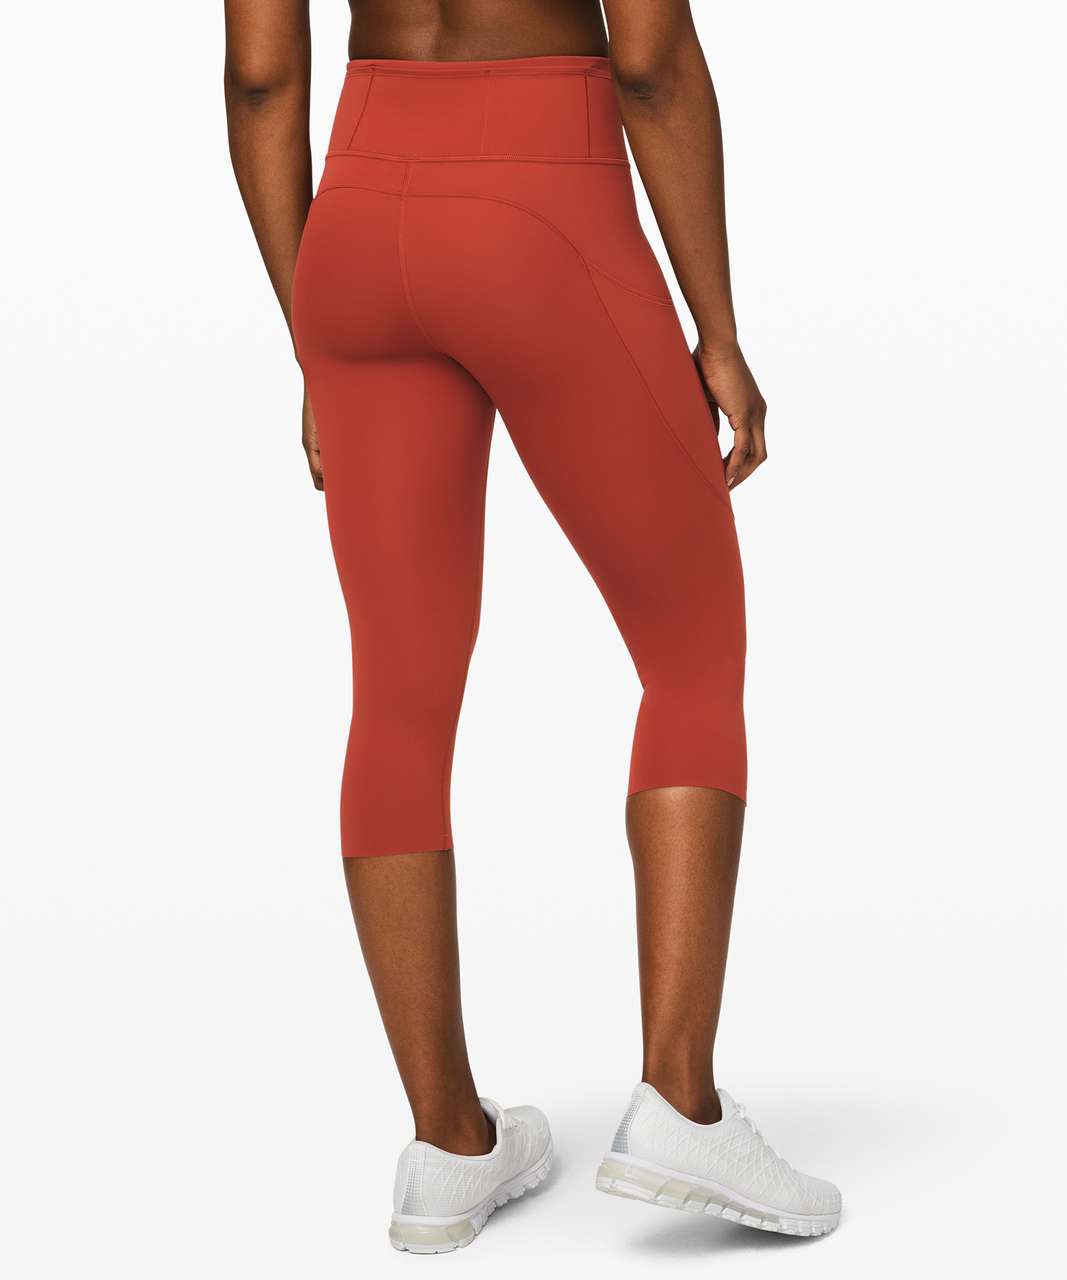 Lululemon Fast and Free Crop II 19 *Non-Reflective - Dark Red